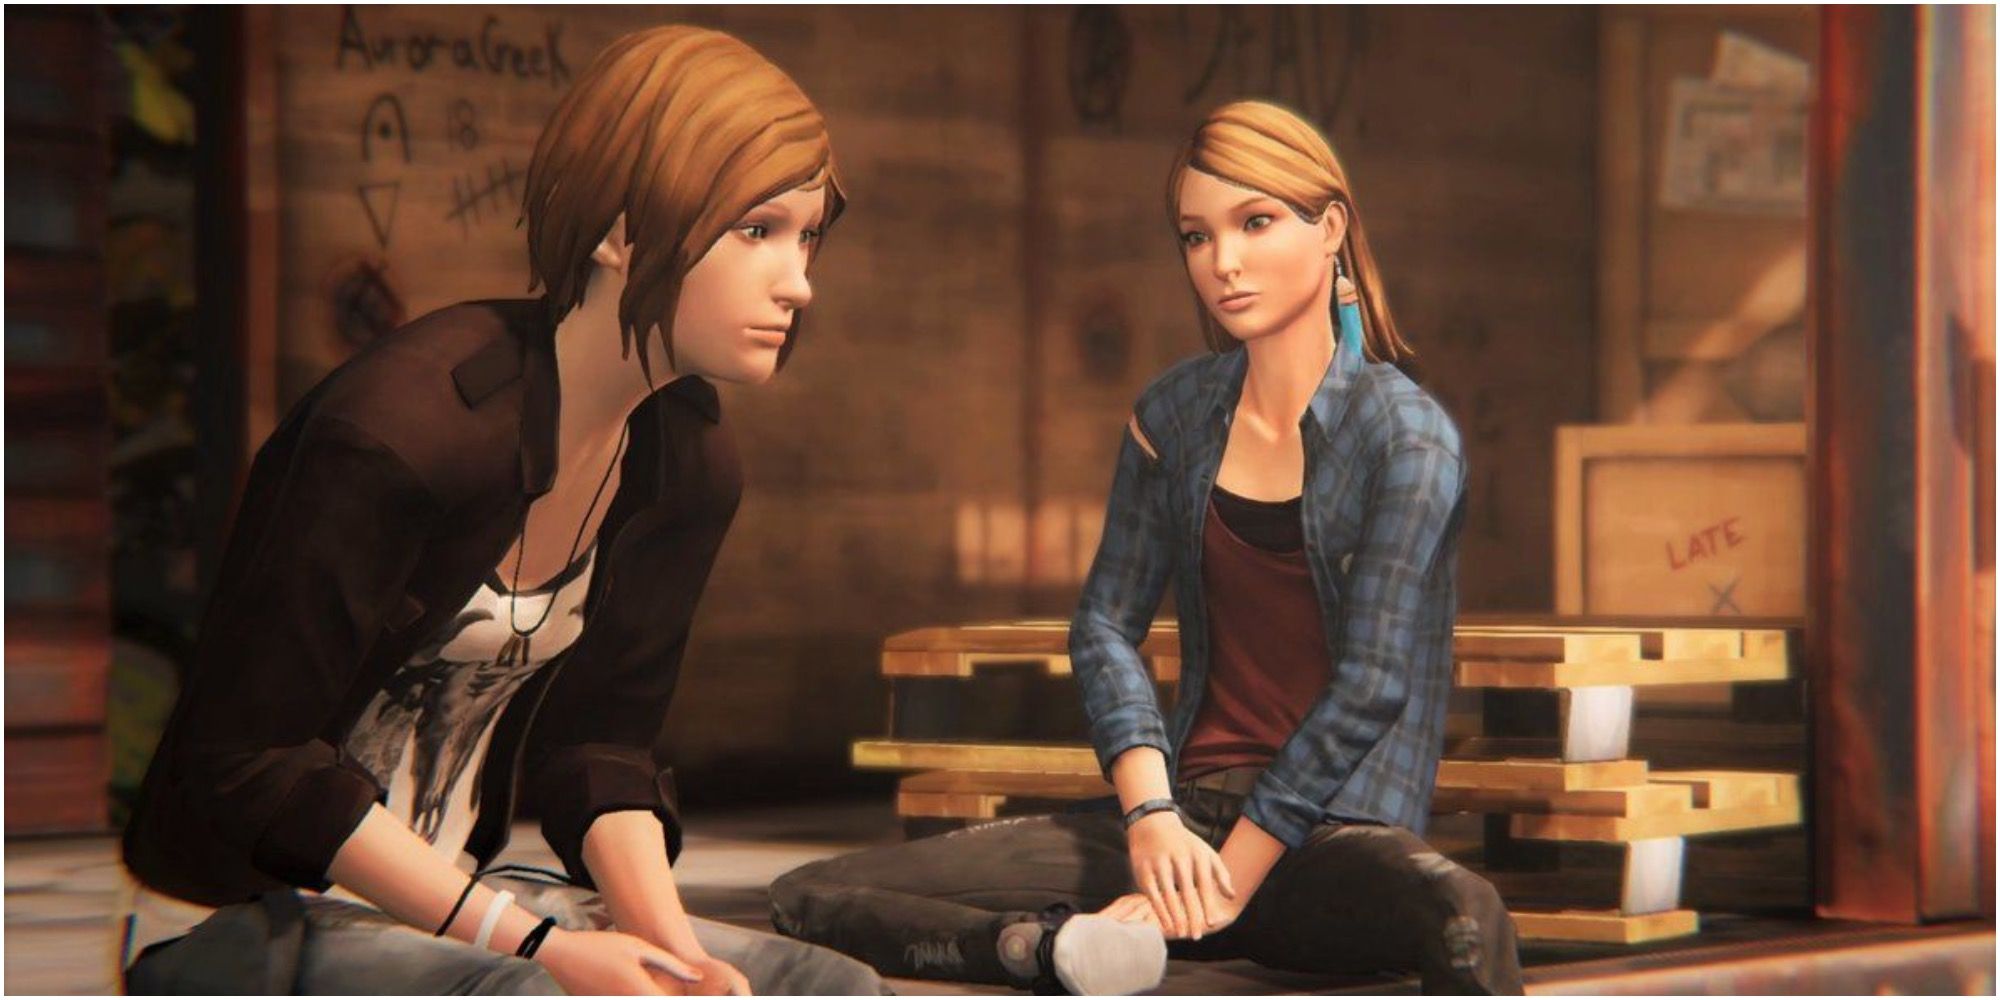 Chloe and Rachel sit together in an abandoned warehouse 